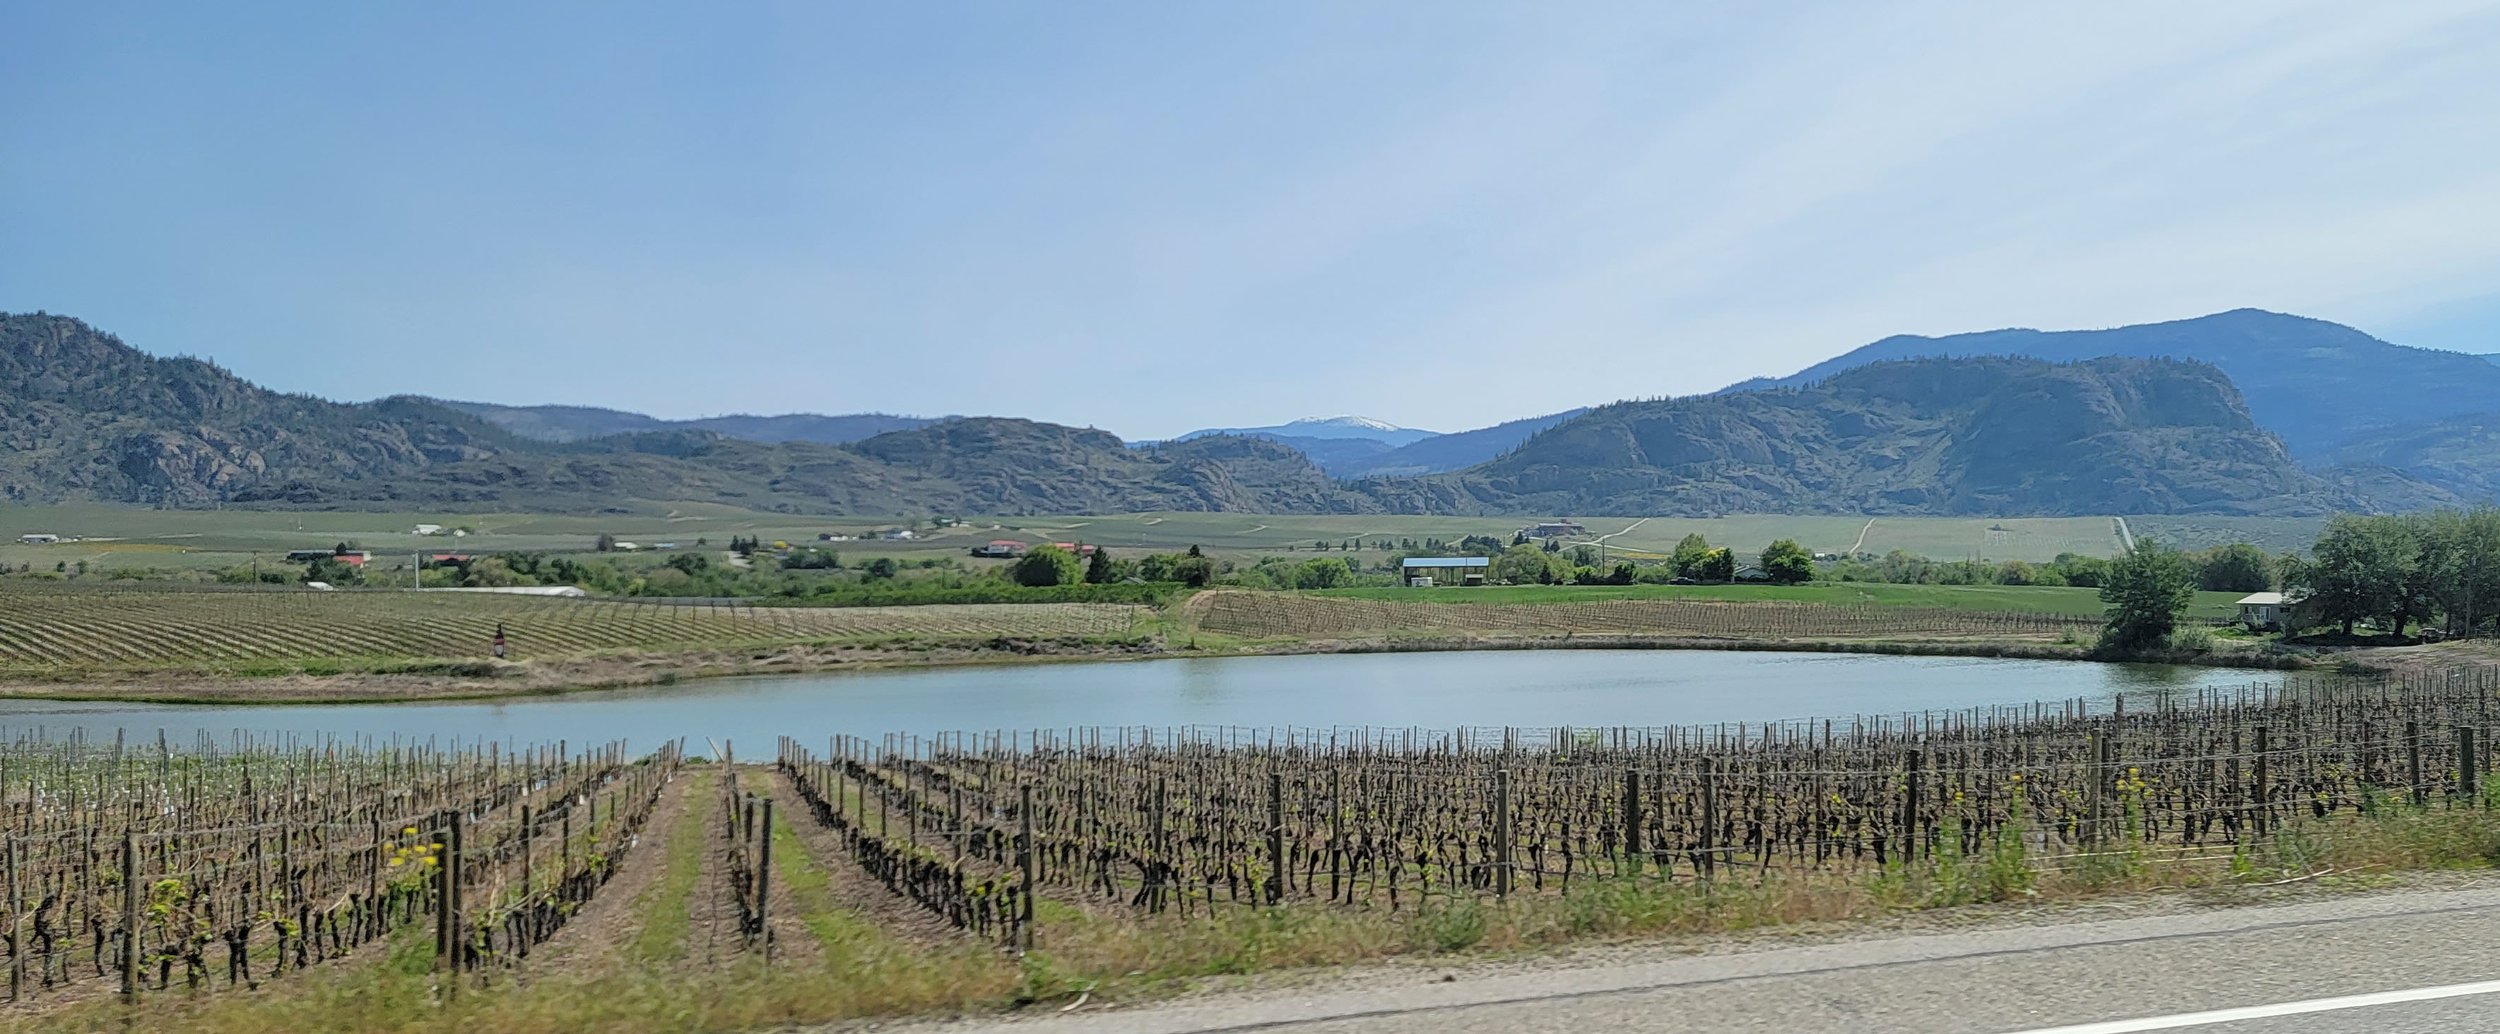 Most large roads are flanked with vineyards and orchards of all kinds.